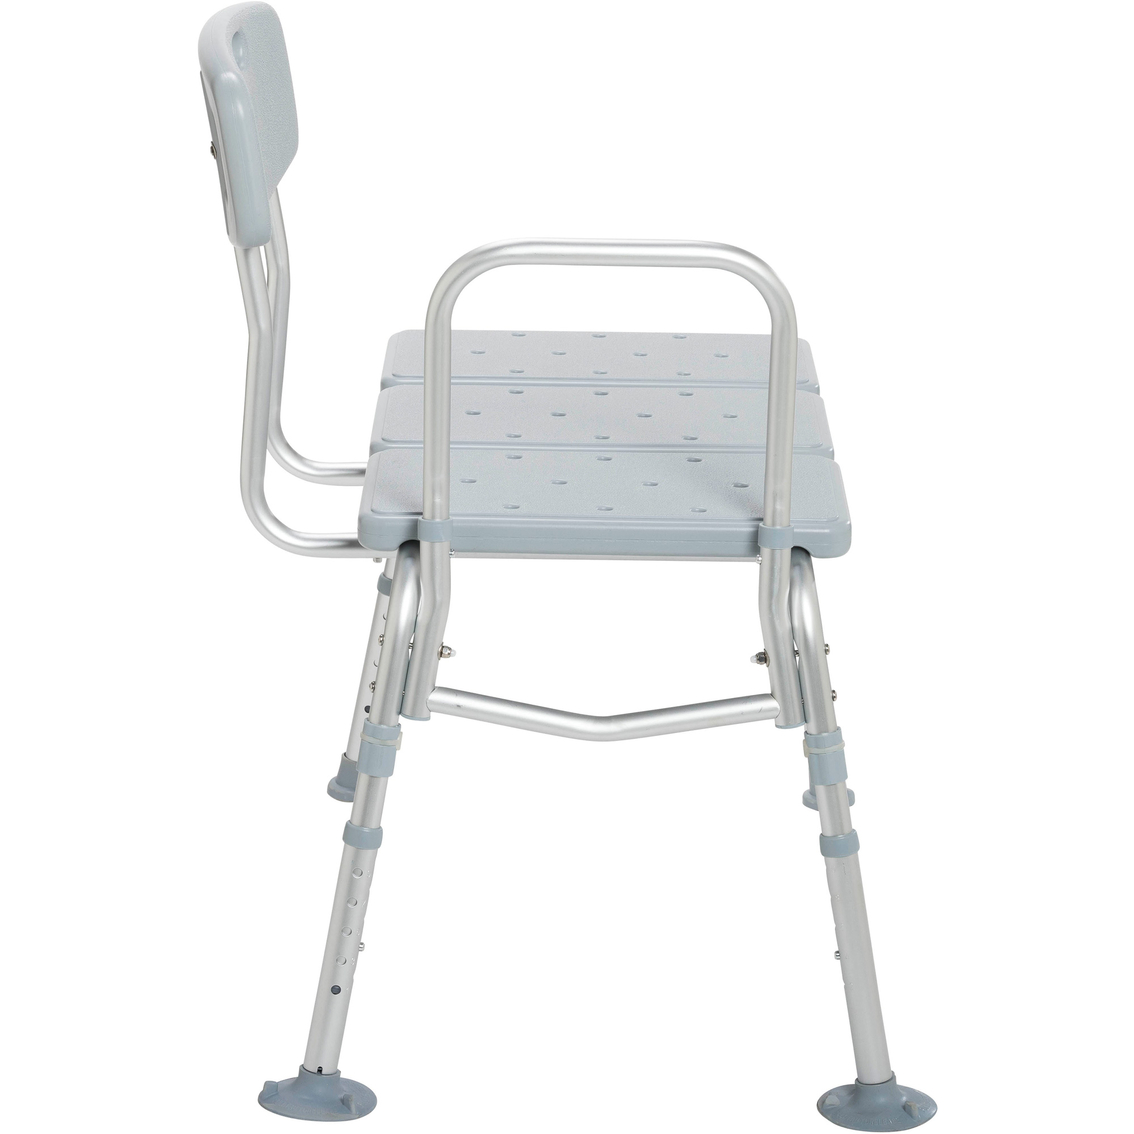 Drive Medical 3 pc. Transfer Bench - Image 4 of 4